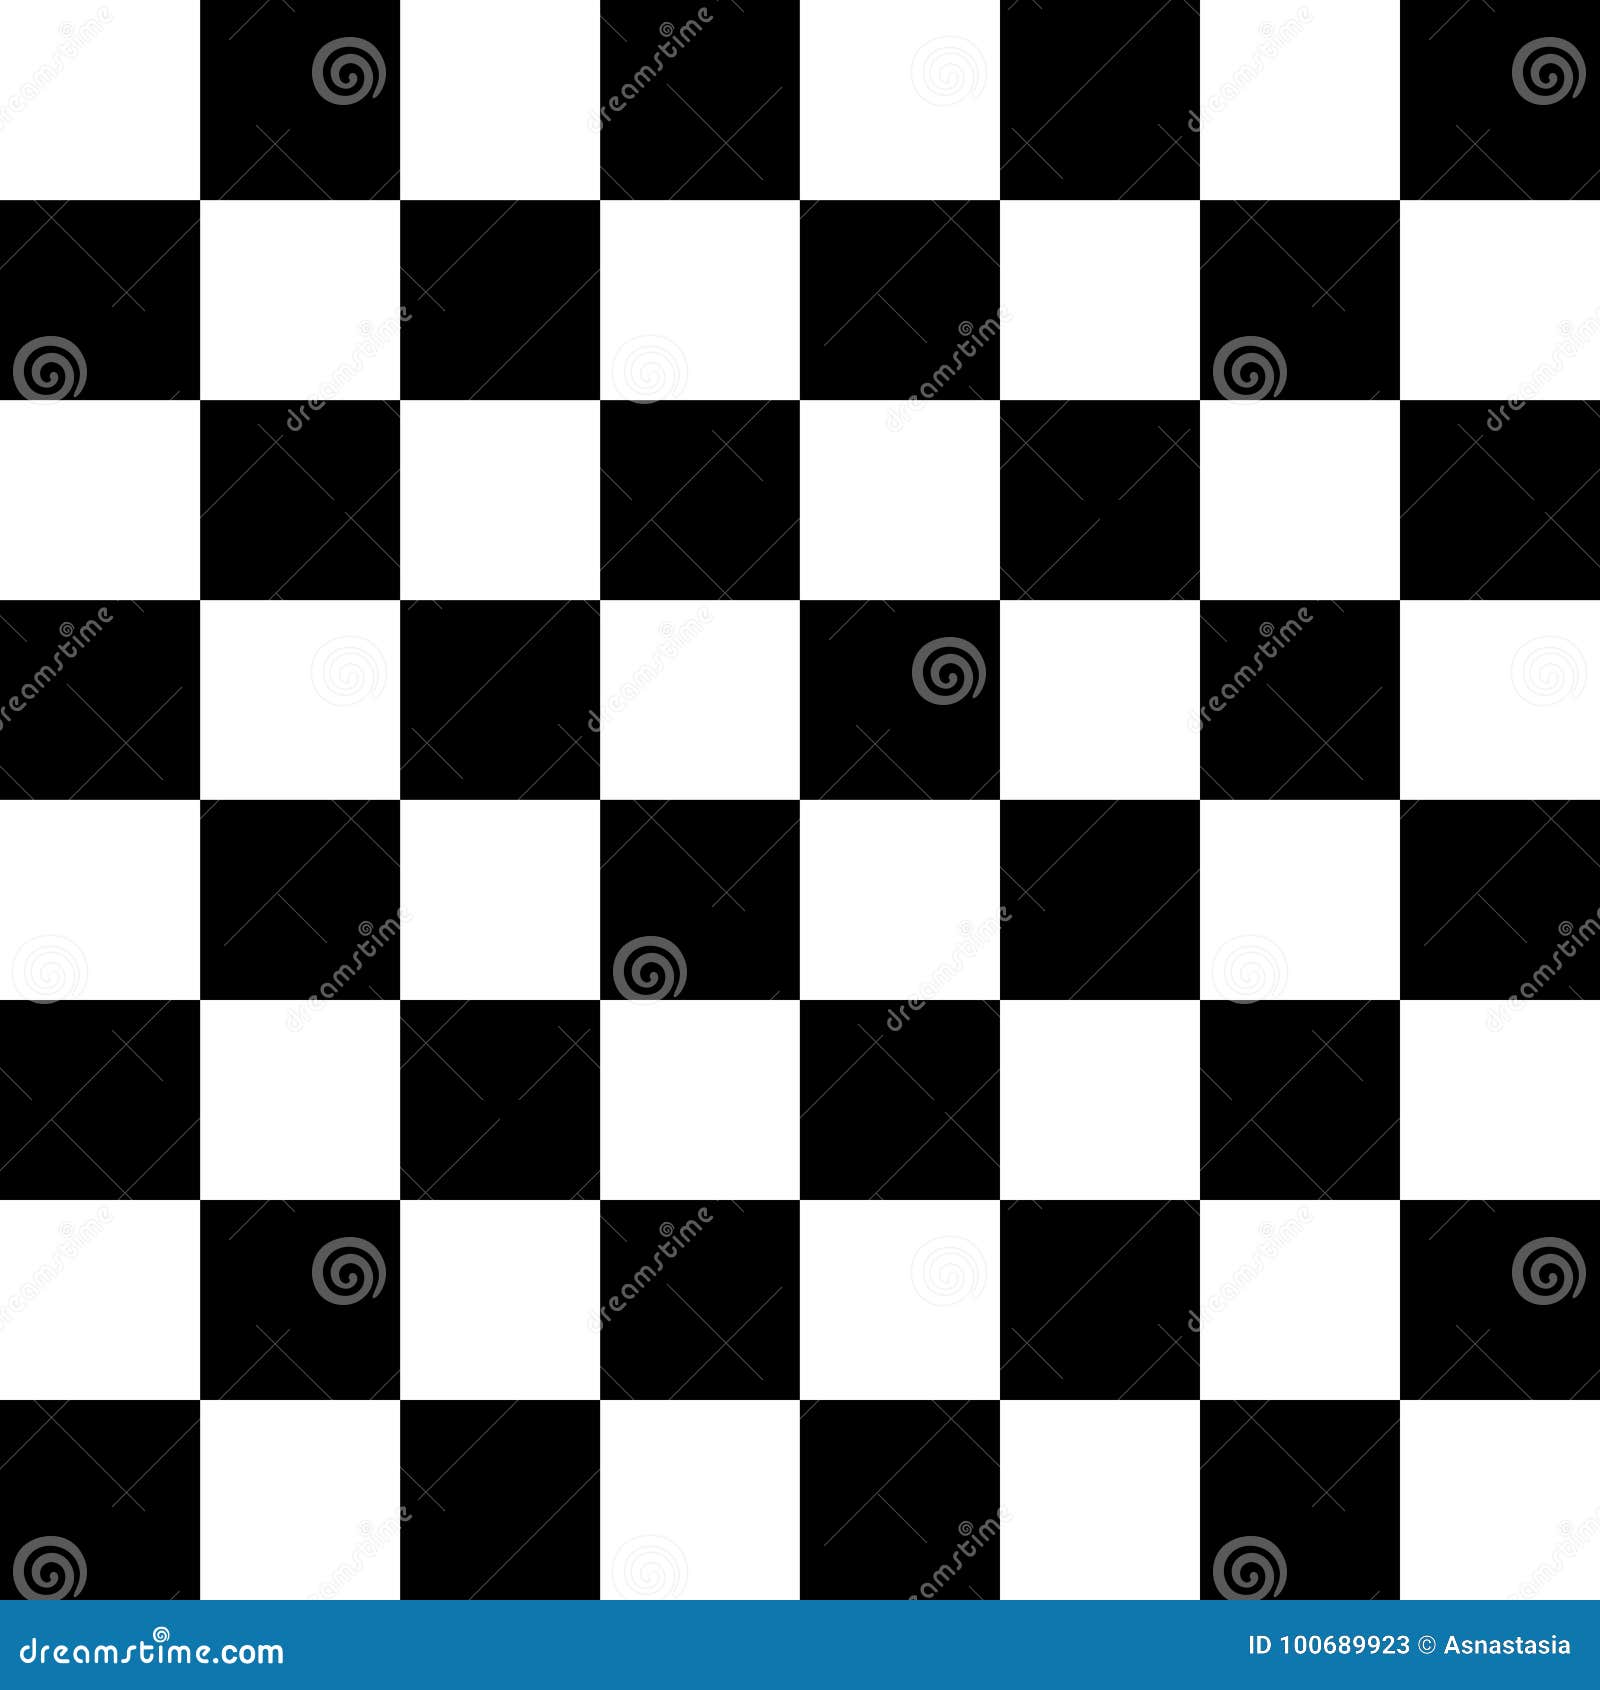 chessboard or checker board seamless pattern in black and white. checkered board for chess or checkers game. strategy